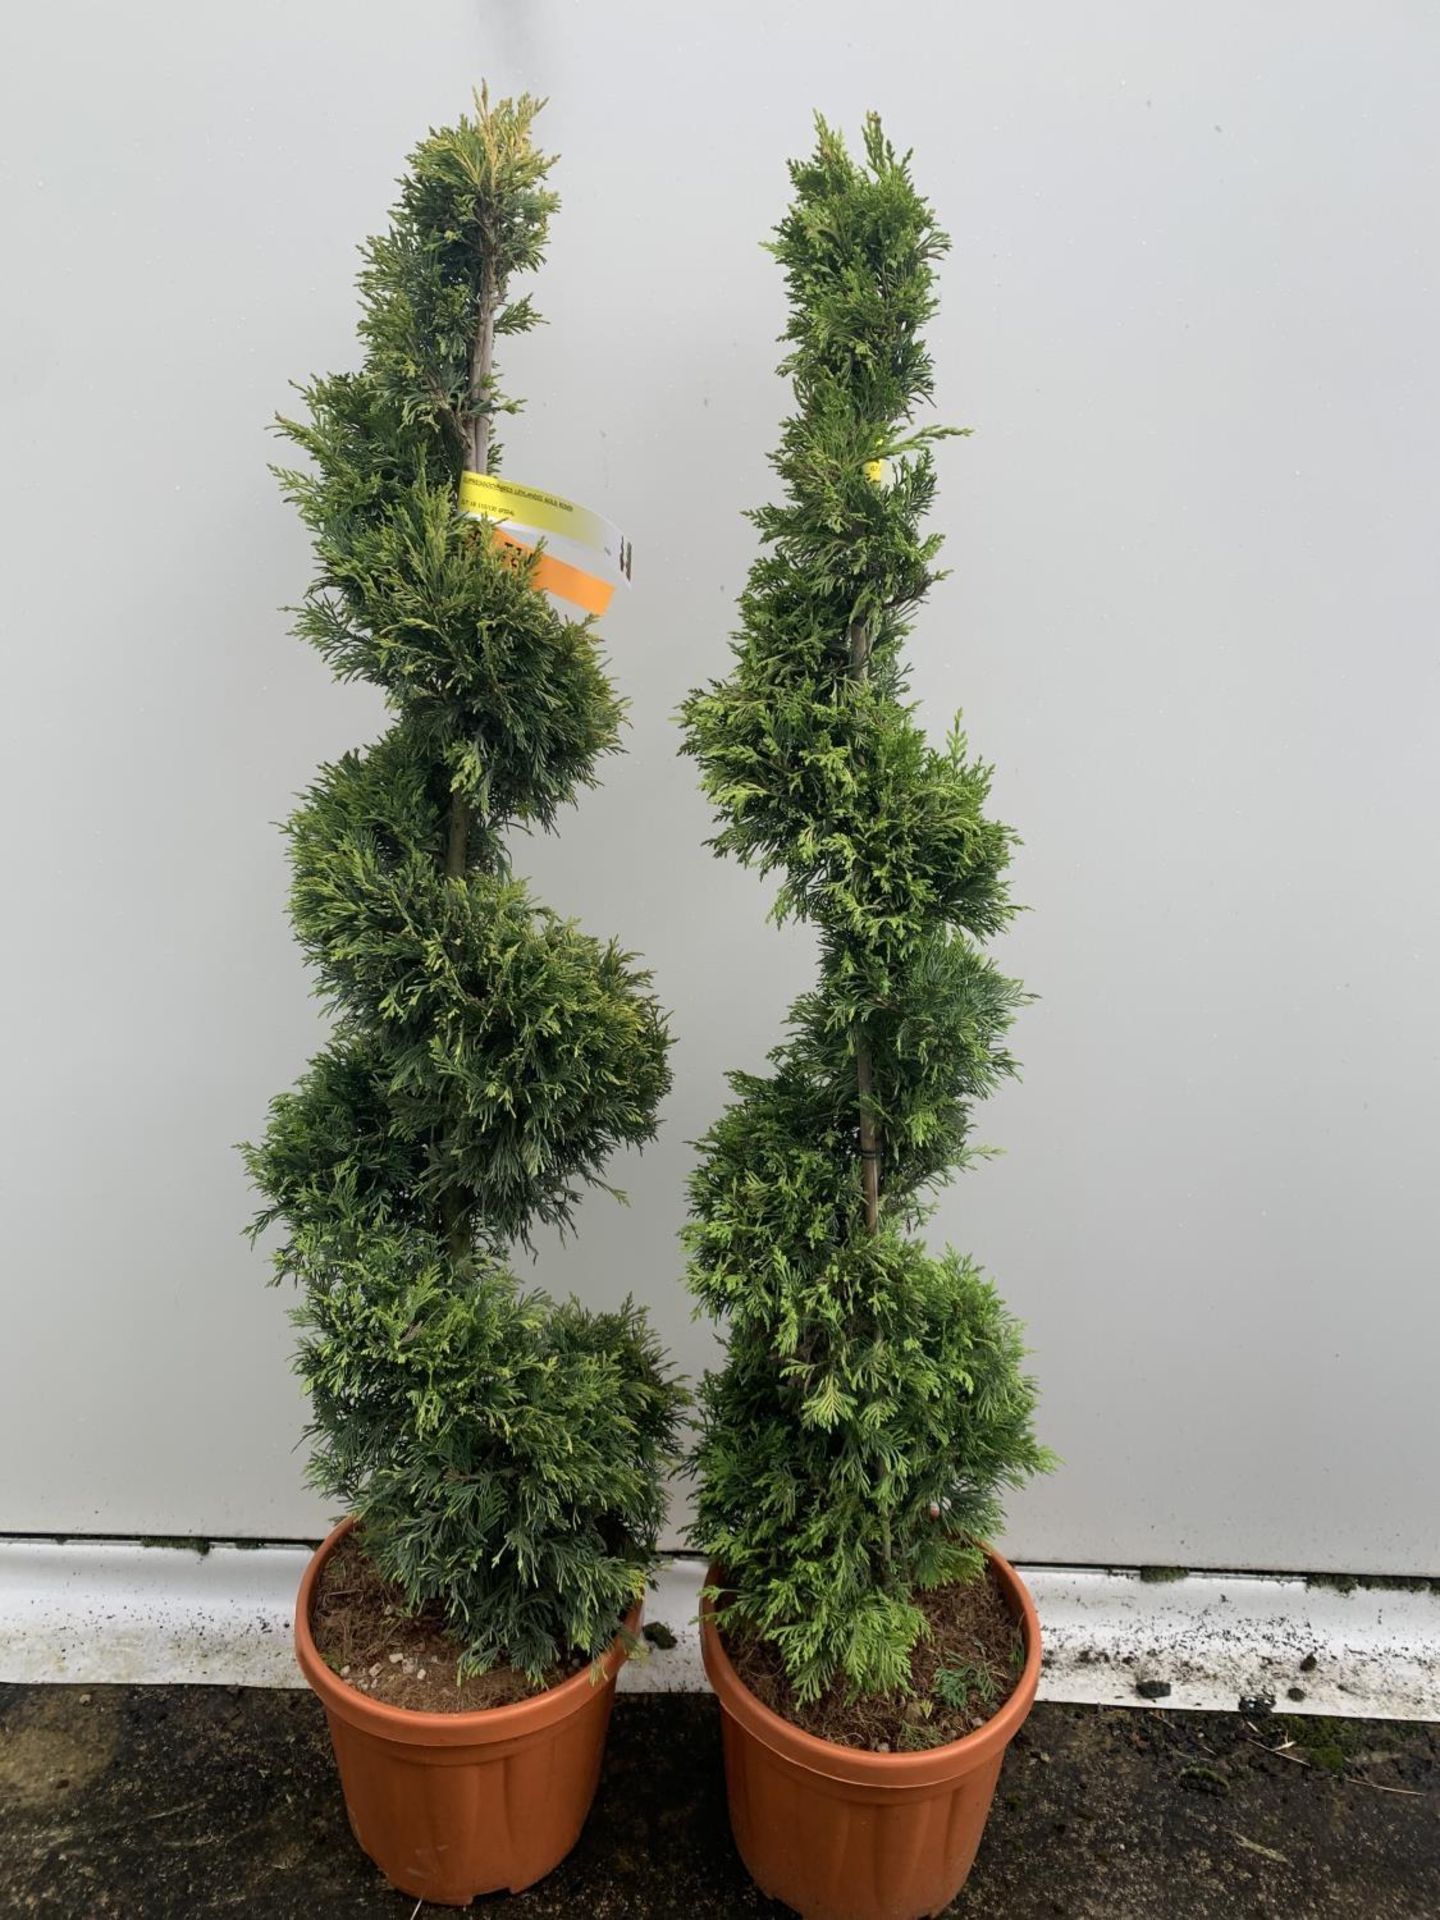 TWO SPIRAL CUPRESSOCYPARIS SPIRAL LEYANDII 'GOLD RIDER' APPROX 160CM IN HEIGHT IN 15 LTR POTS PLUS - Image 4 of 6